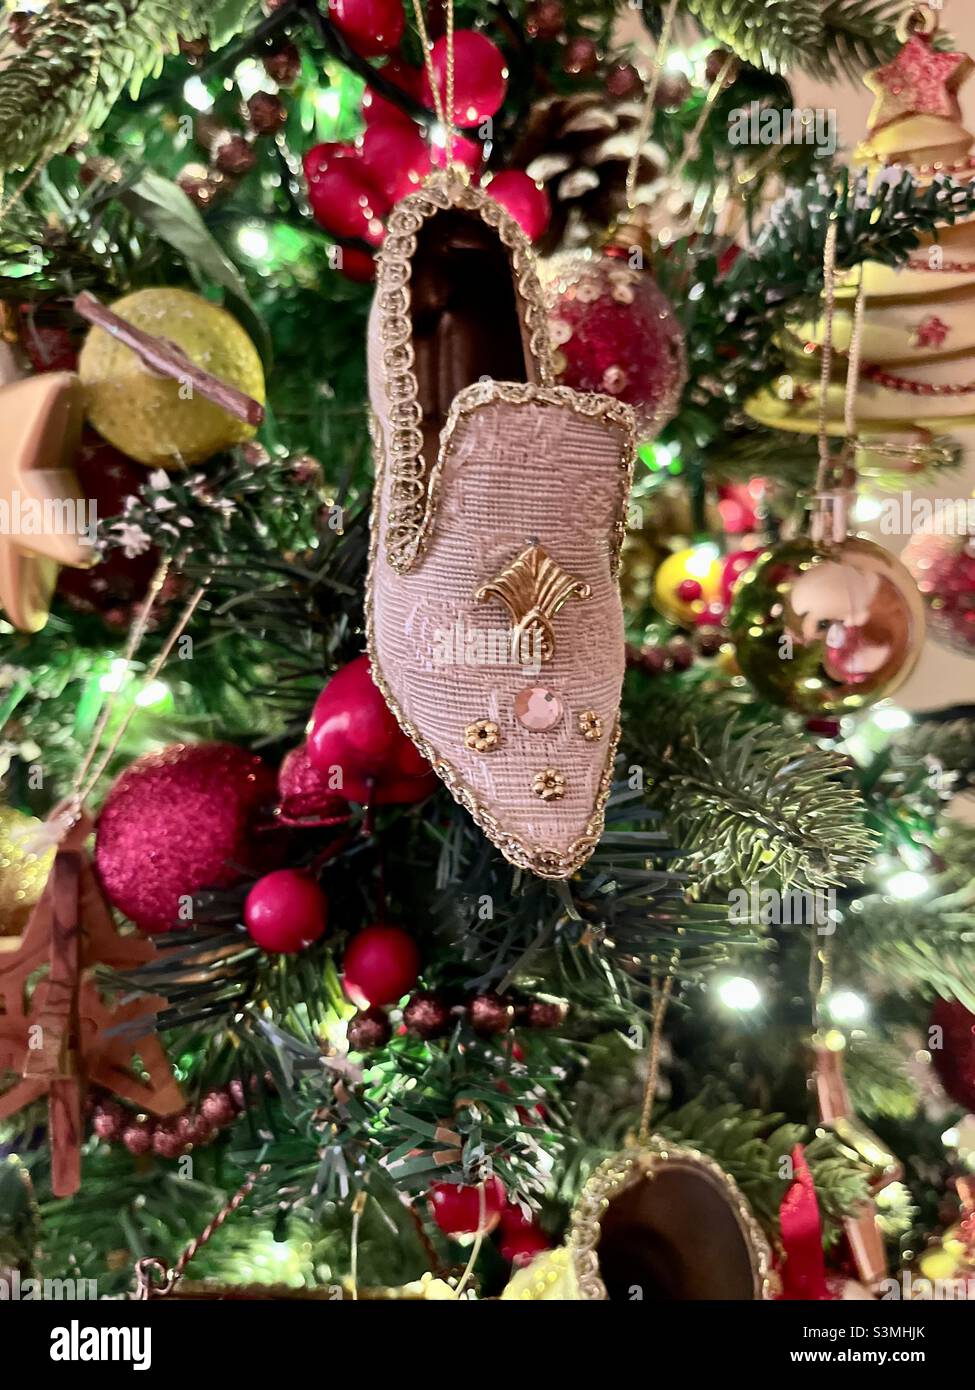 Vintage Victorian style Christmas tree decoration of a shoe Stock Photo